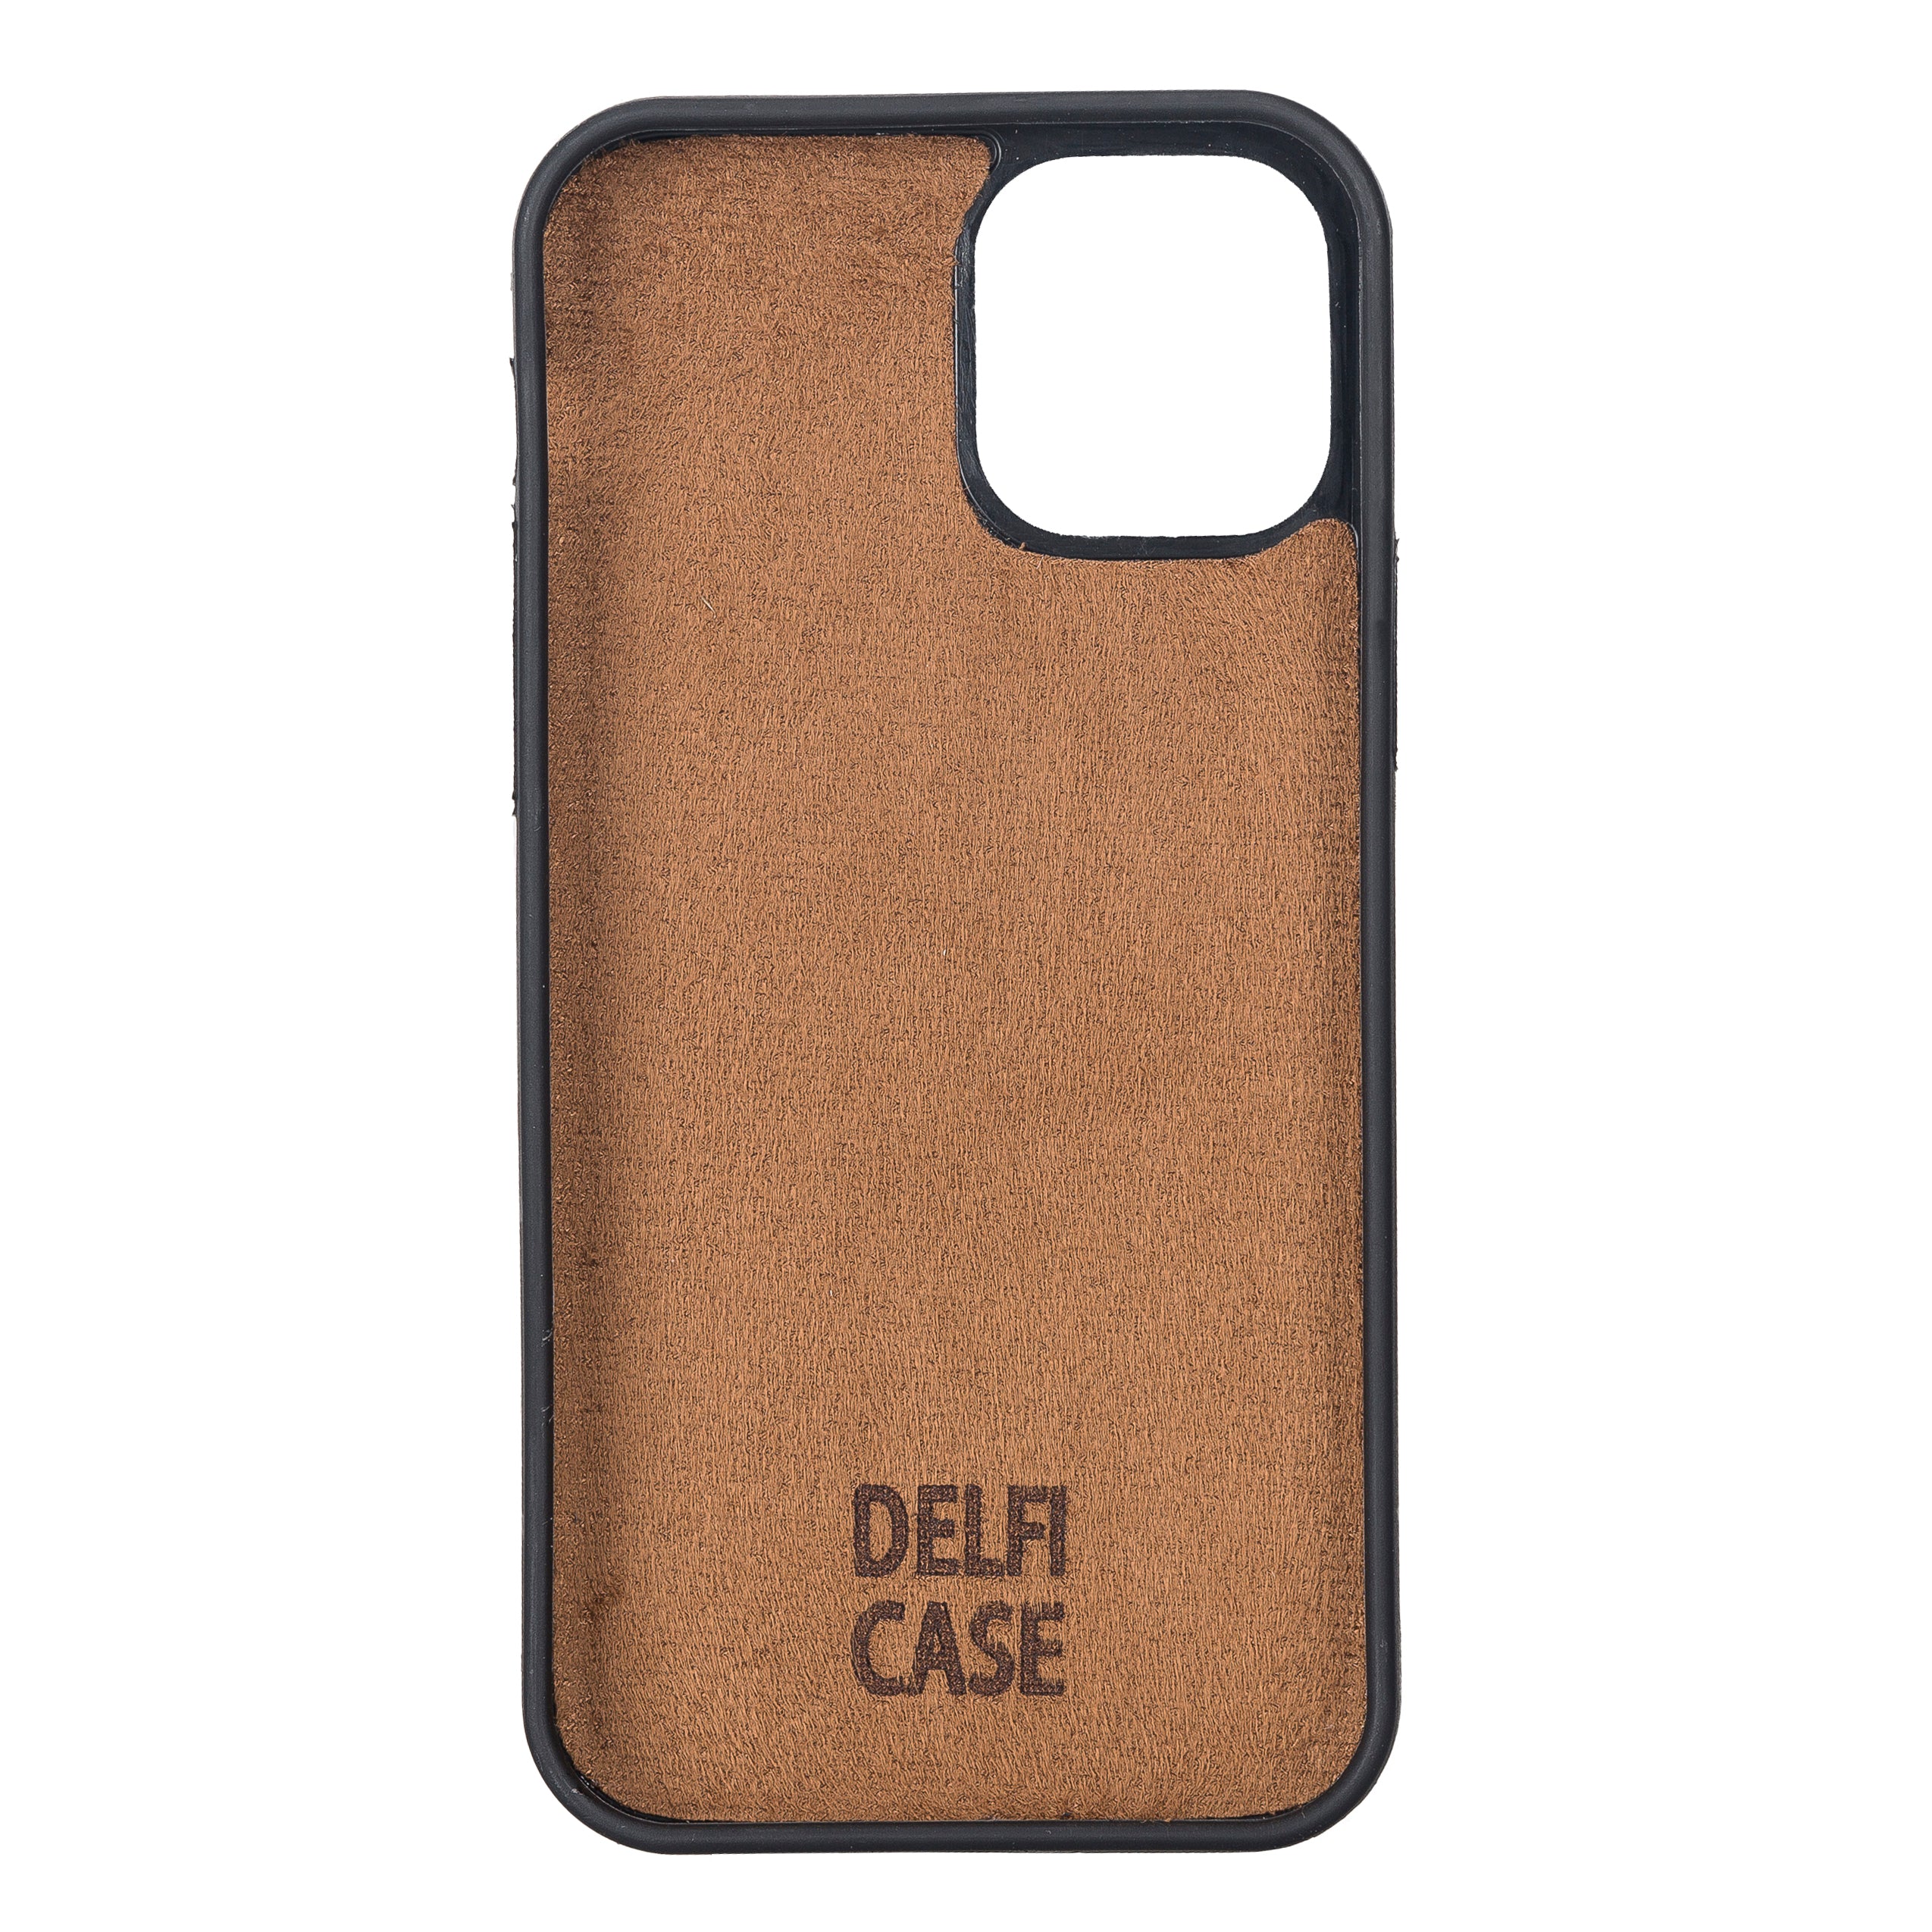 DelfiCase Magnetic Detachable Leather Wallet Case for iPhone 12 and iPhone 12 Pro (6.1") 26